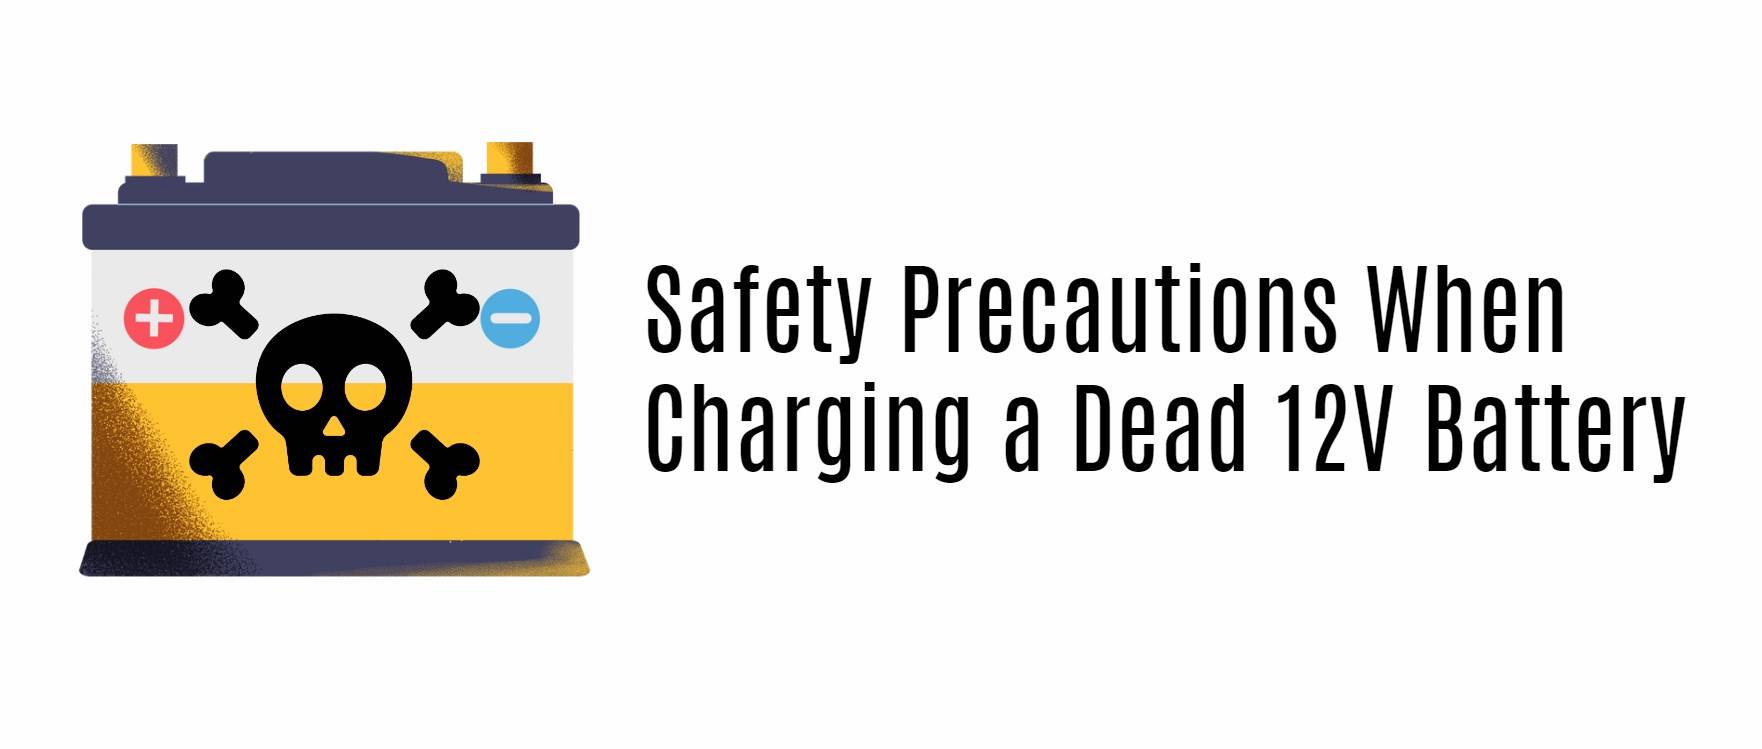 Safety Precautions When Charging a Dead 12v Battery